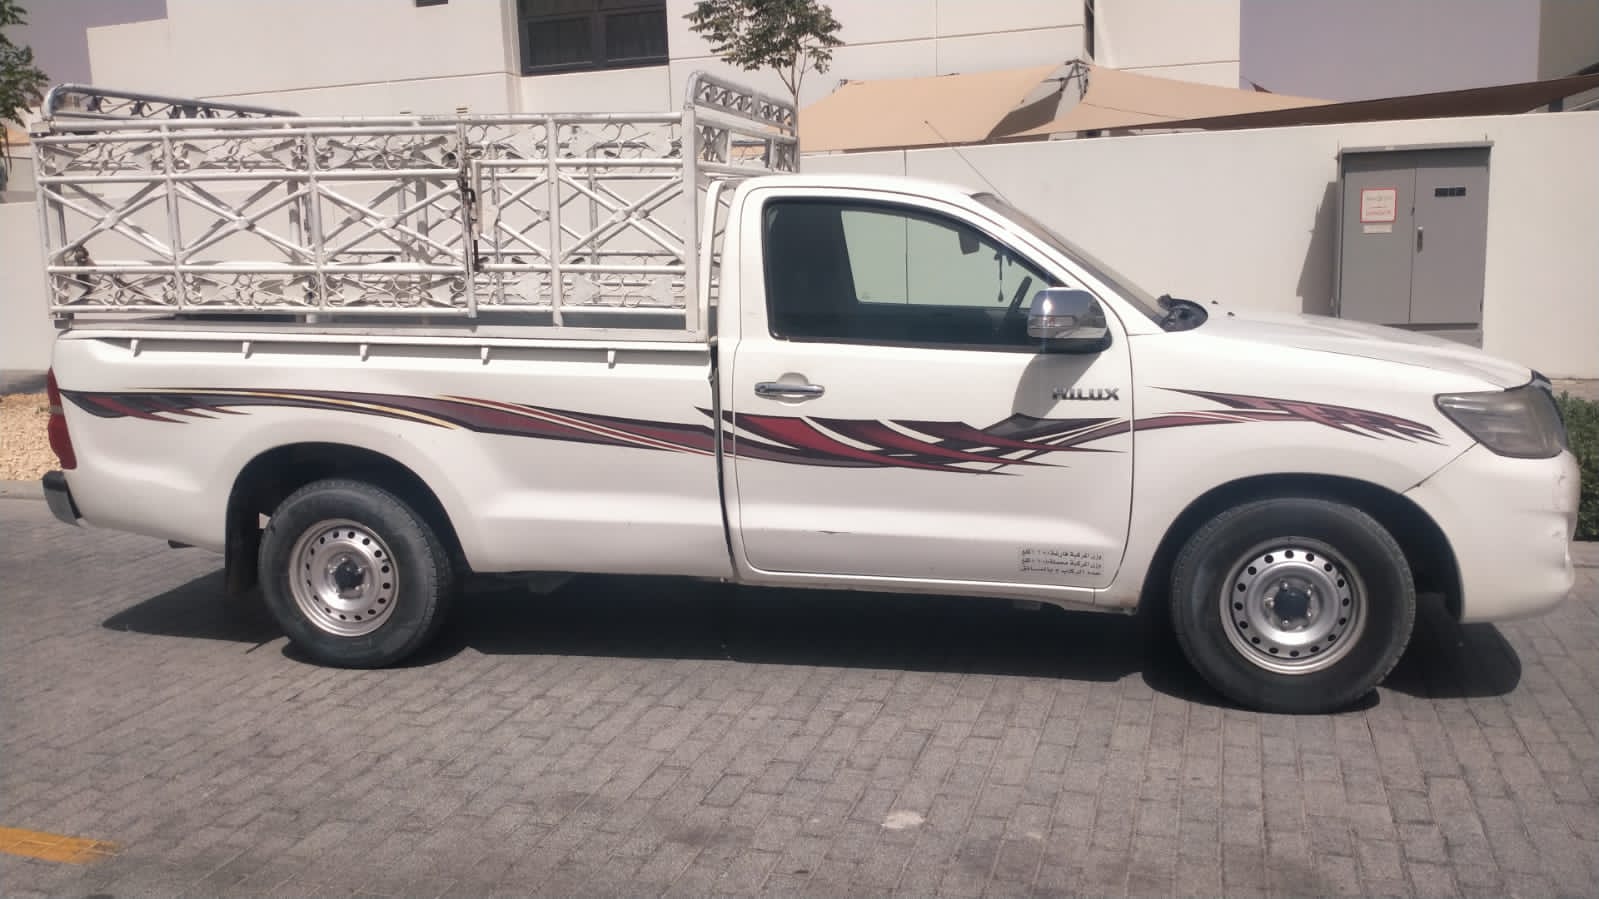 Office Movers and Packers in Dubai | Movers And Packers In Fujairah | Movers and Packers in Dubai | Movers and Packers in Bur Dubai | Movers And Packers In Al Ain | House Movers in Dubai | Delivery Service in Dubai | 3 Ton Pickup For Rent in Dubai | 3 Ton Pickup For Rent in Dubai | 1 Ton Pickup For Rent in Dubai